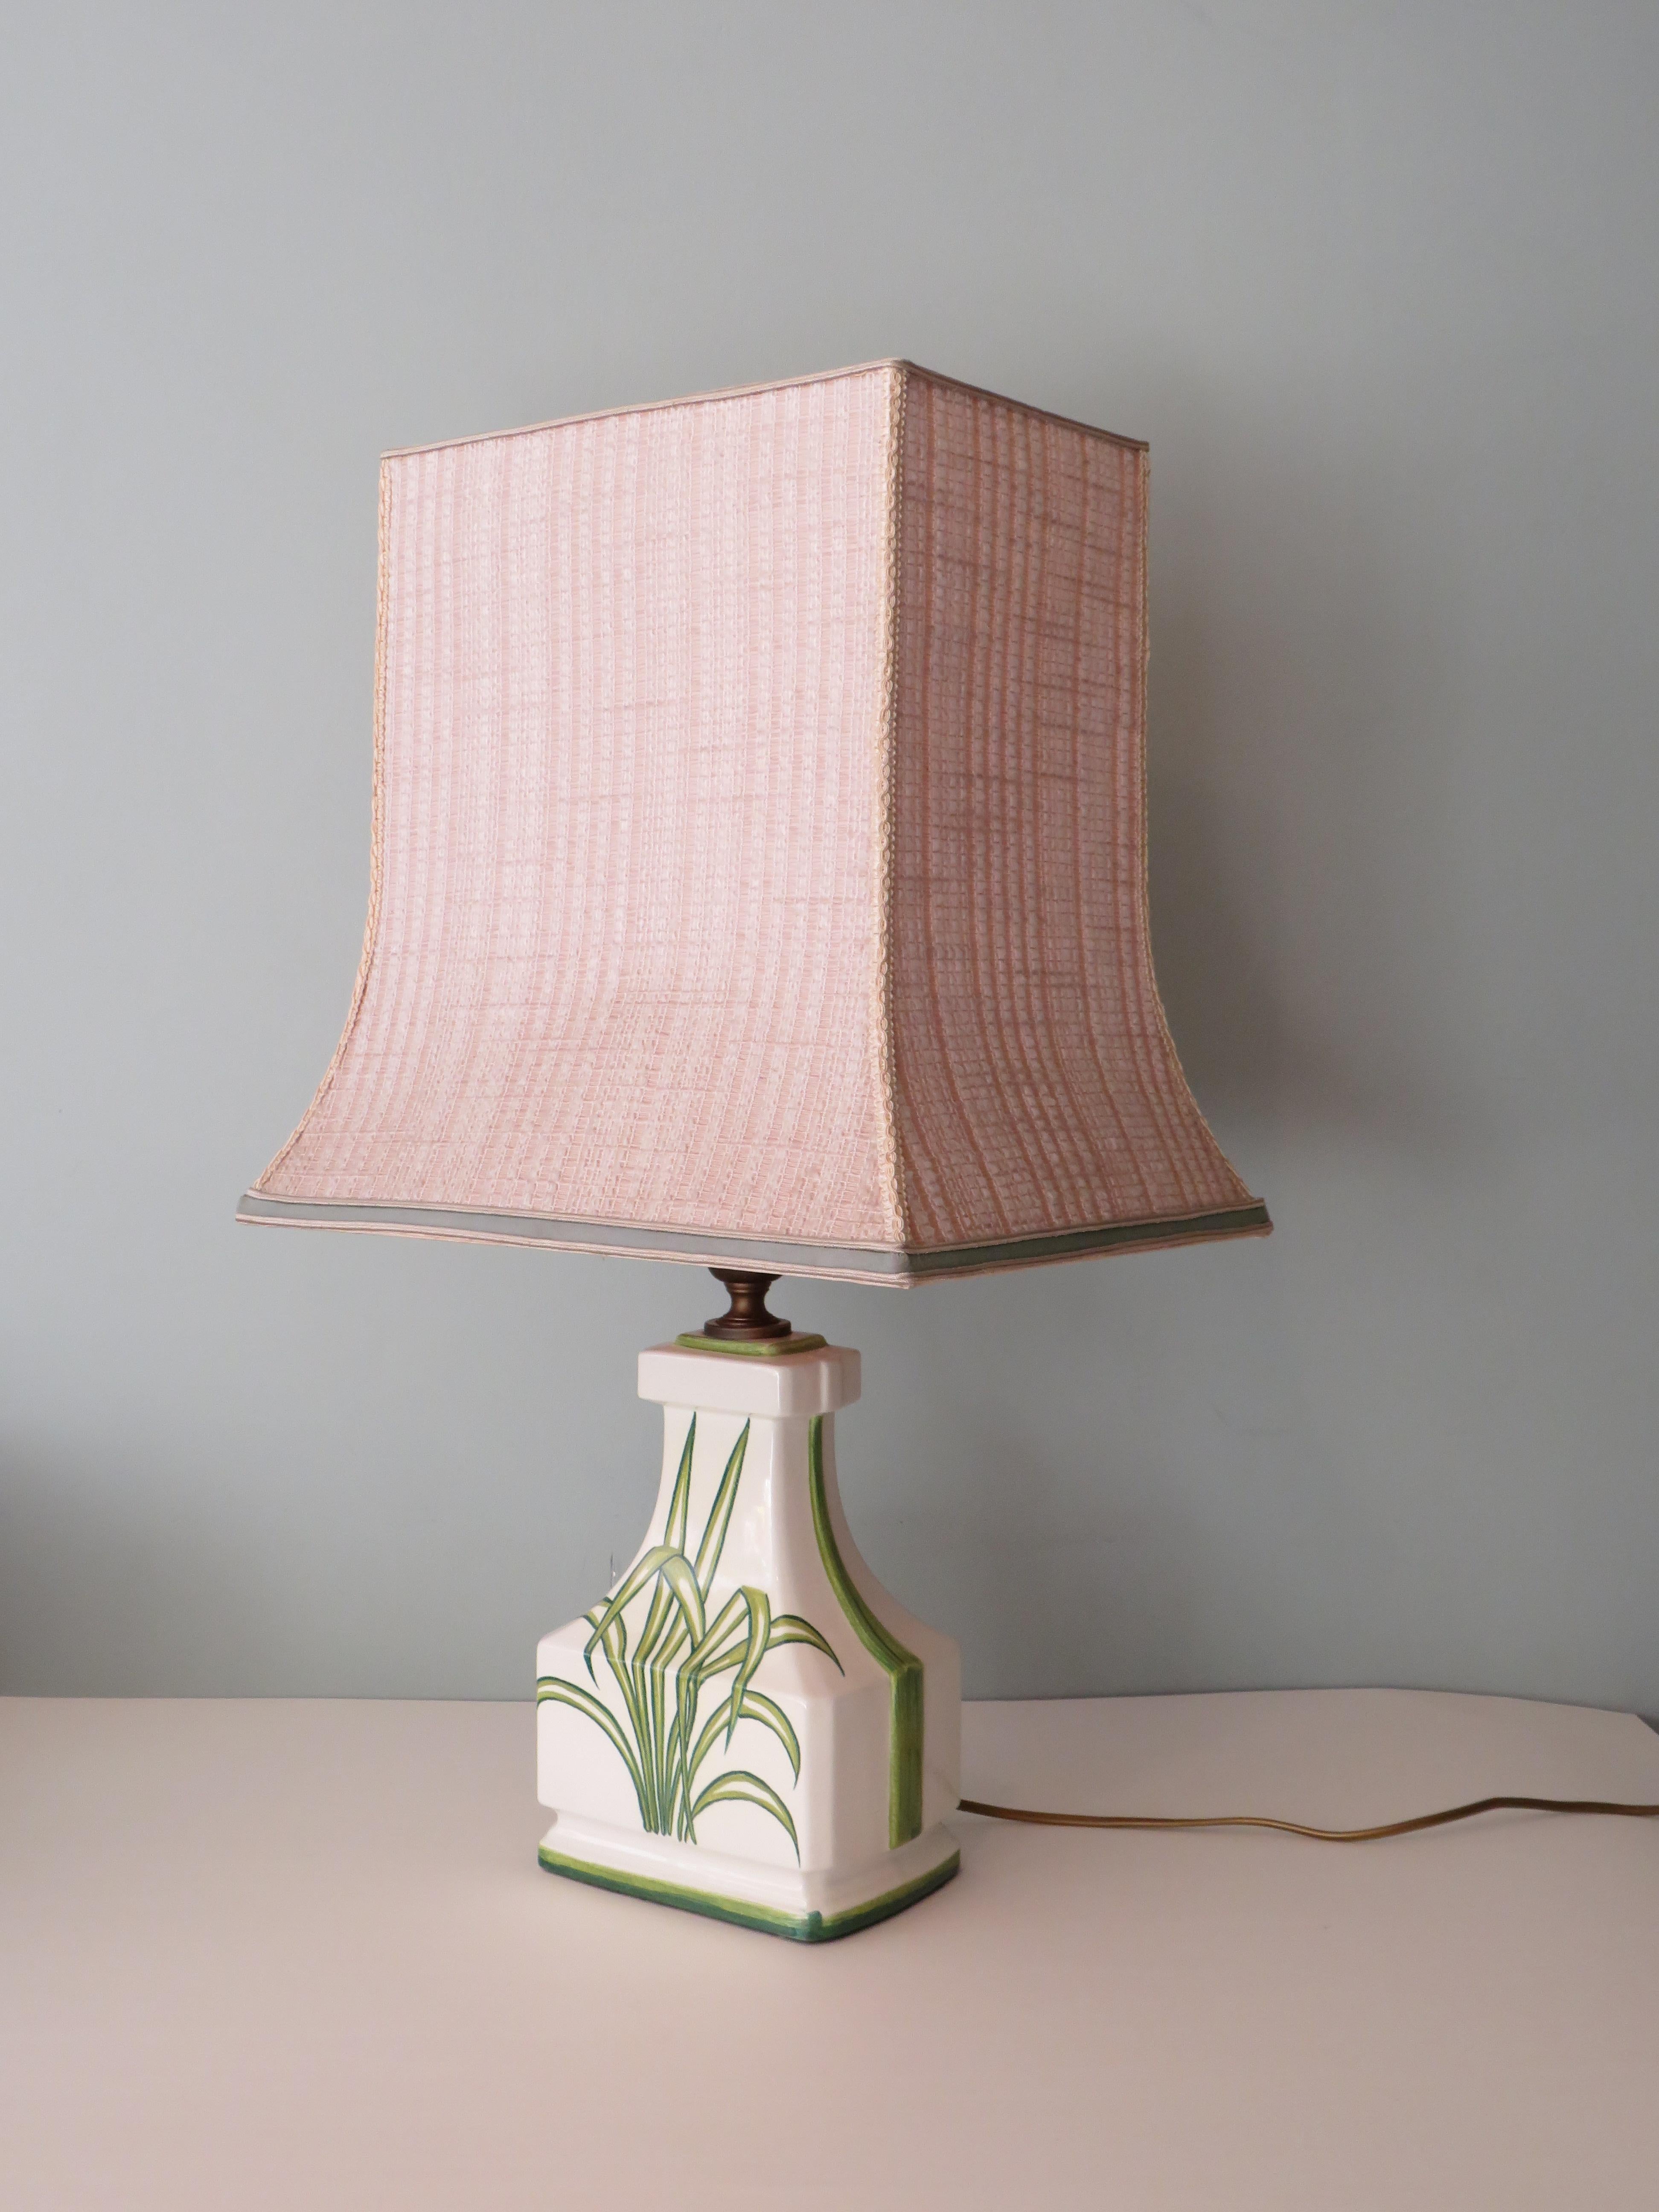 Hollywood Regency Mid-Century Ceramic Table Lamp with Pagoda Shaped Lampshade, France, 1960s For Sale